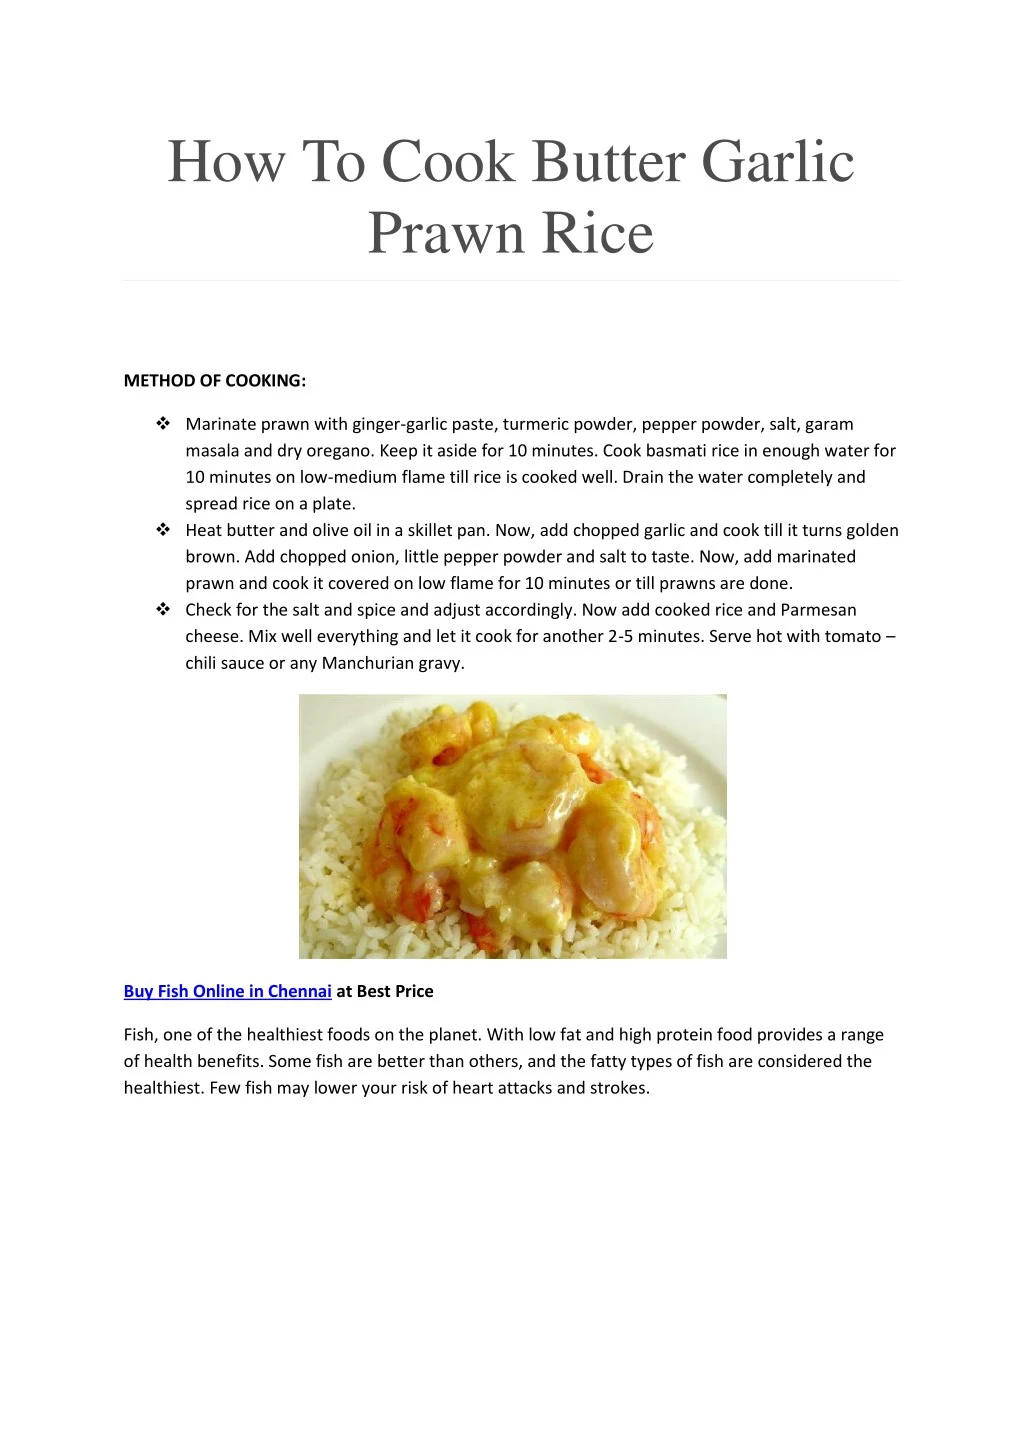 how to cook butter garlic prawn rice